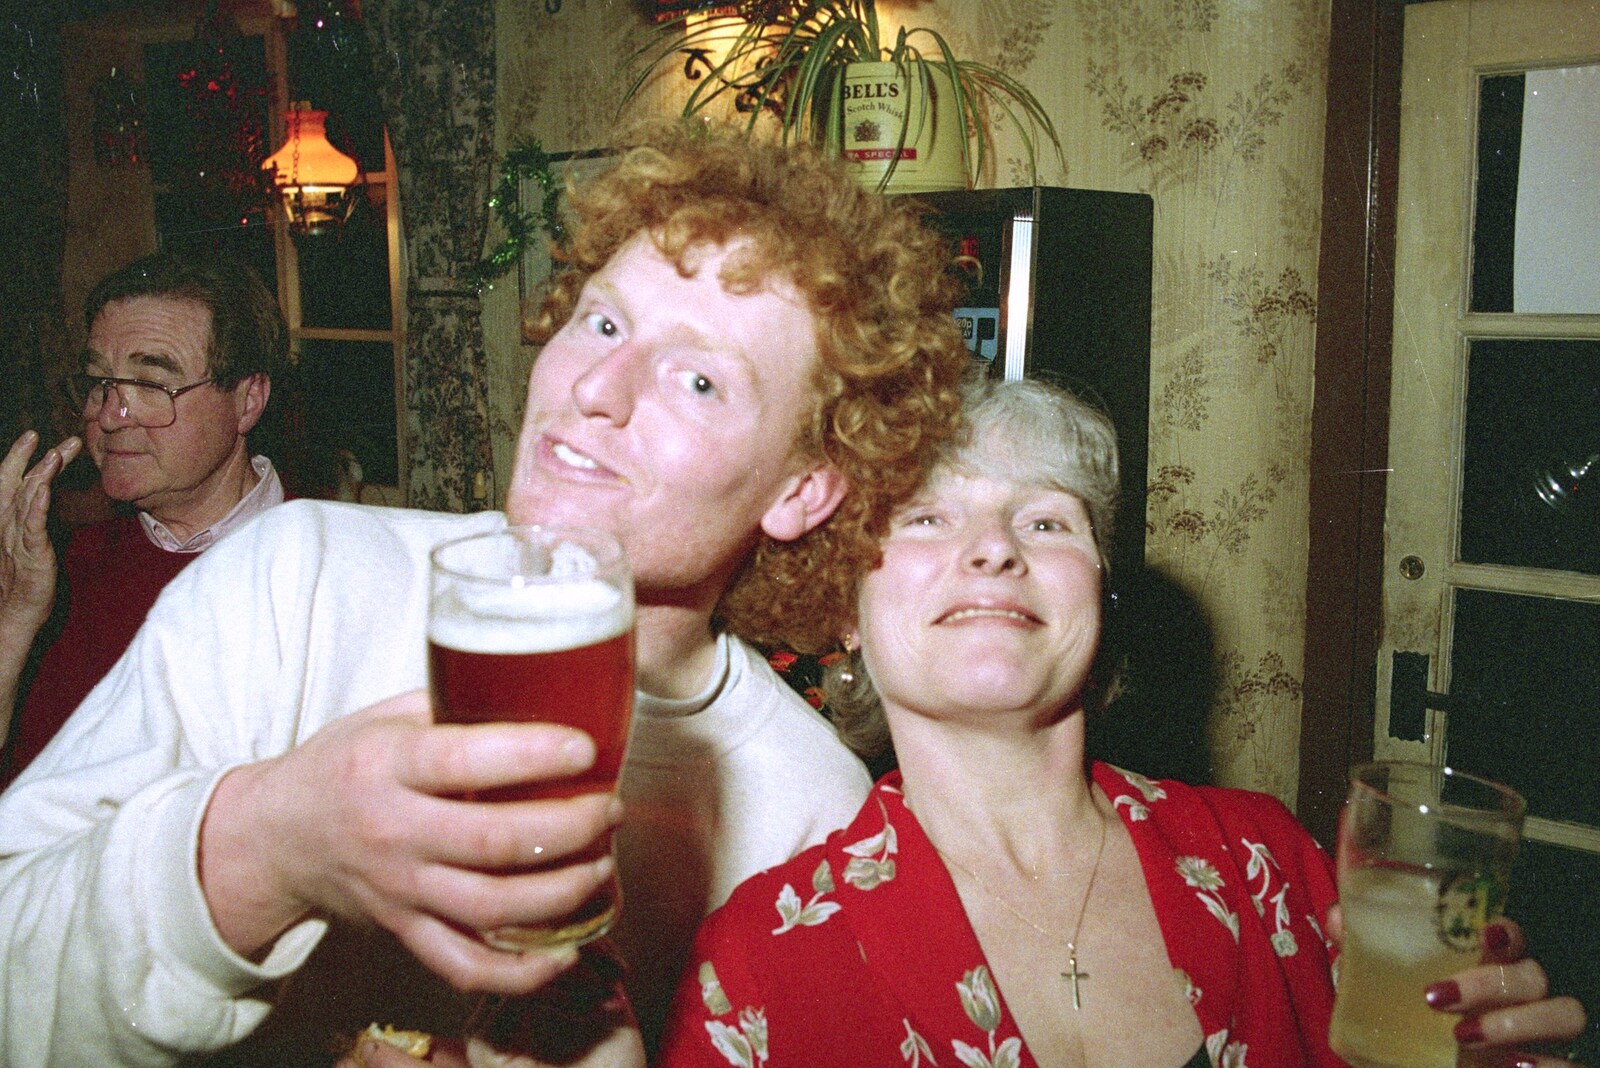 Wavy and Spammy from New Year's Eve in the Swan Inn, Brome, Suffolk - 31st December 1995